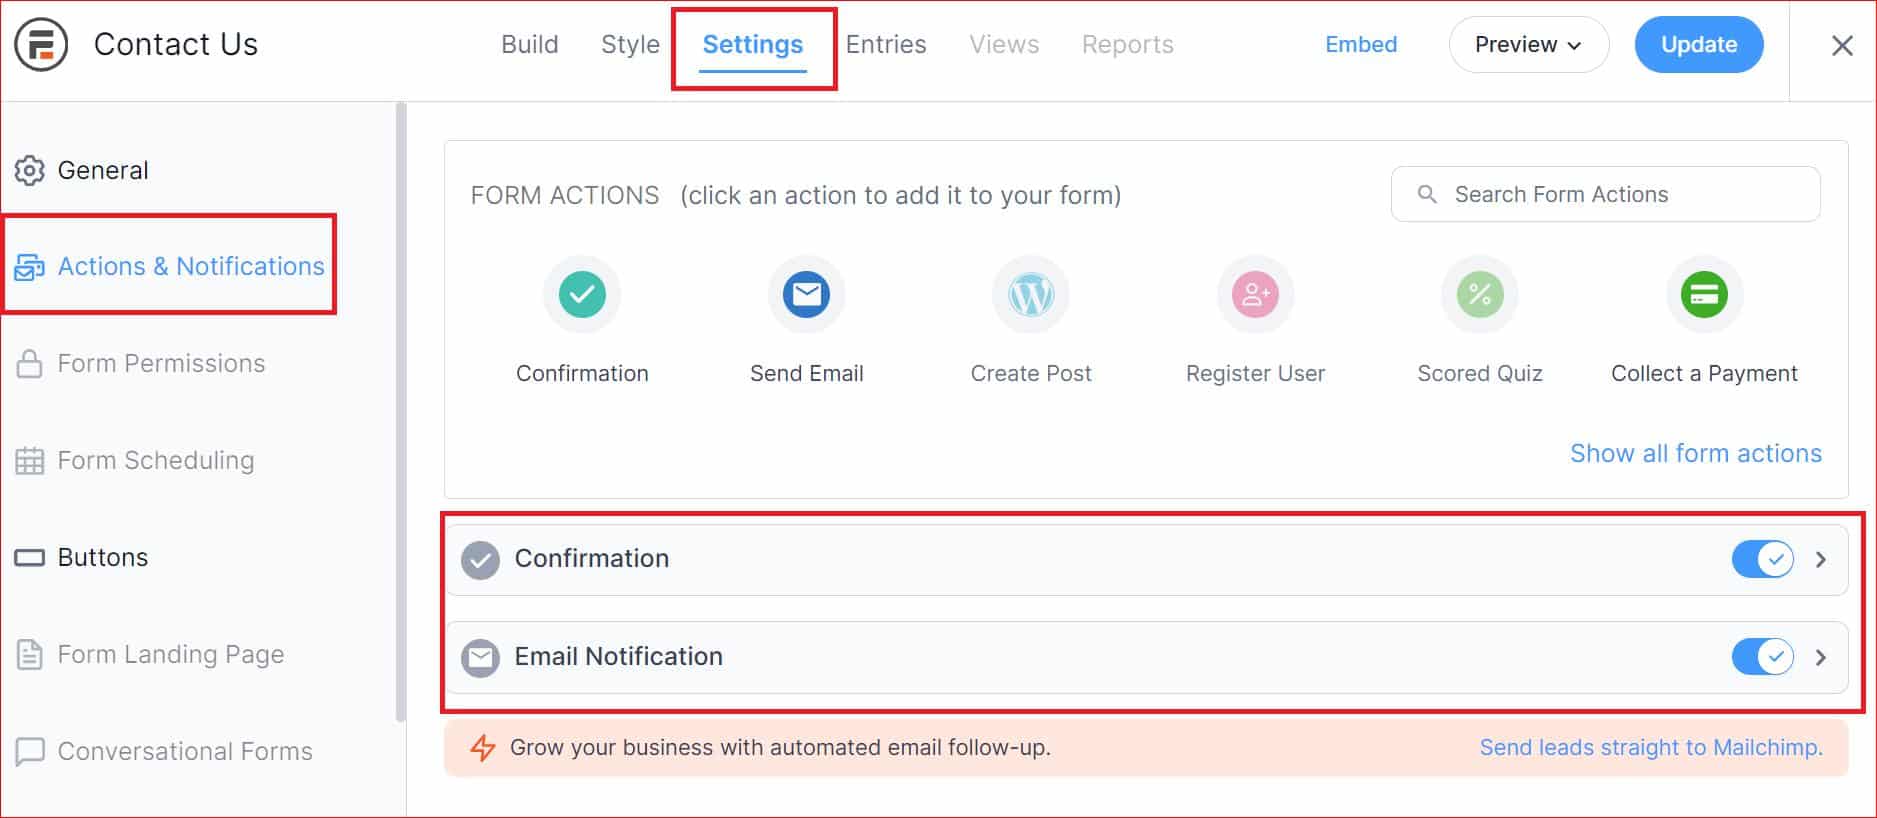 Email Notifications Settings